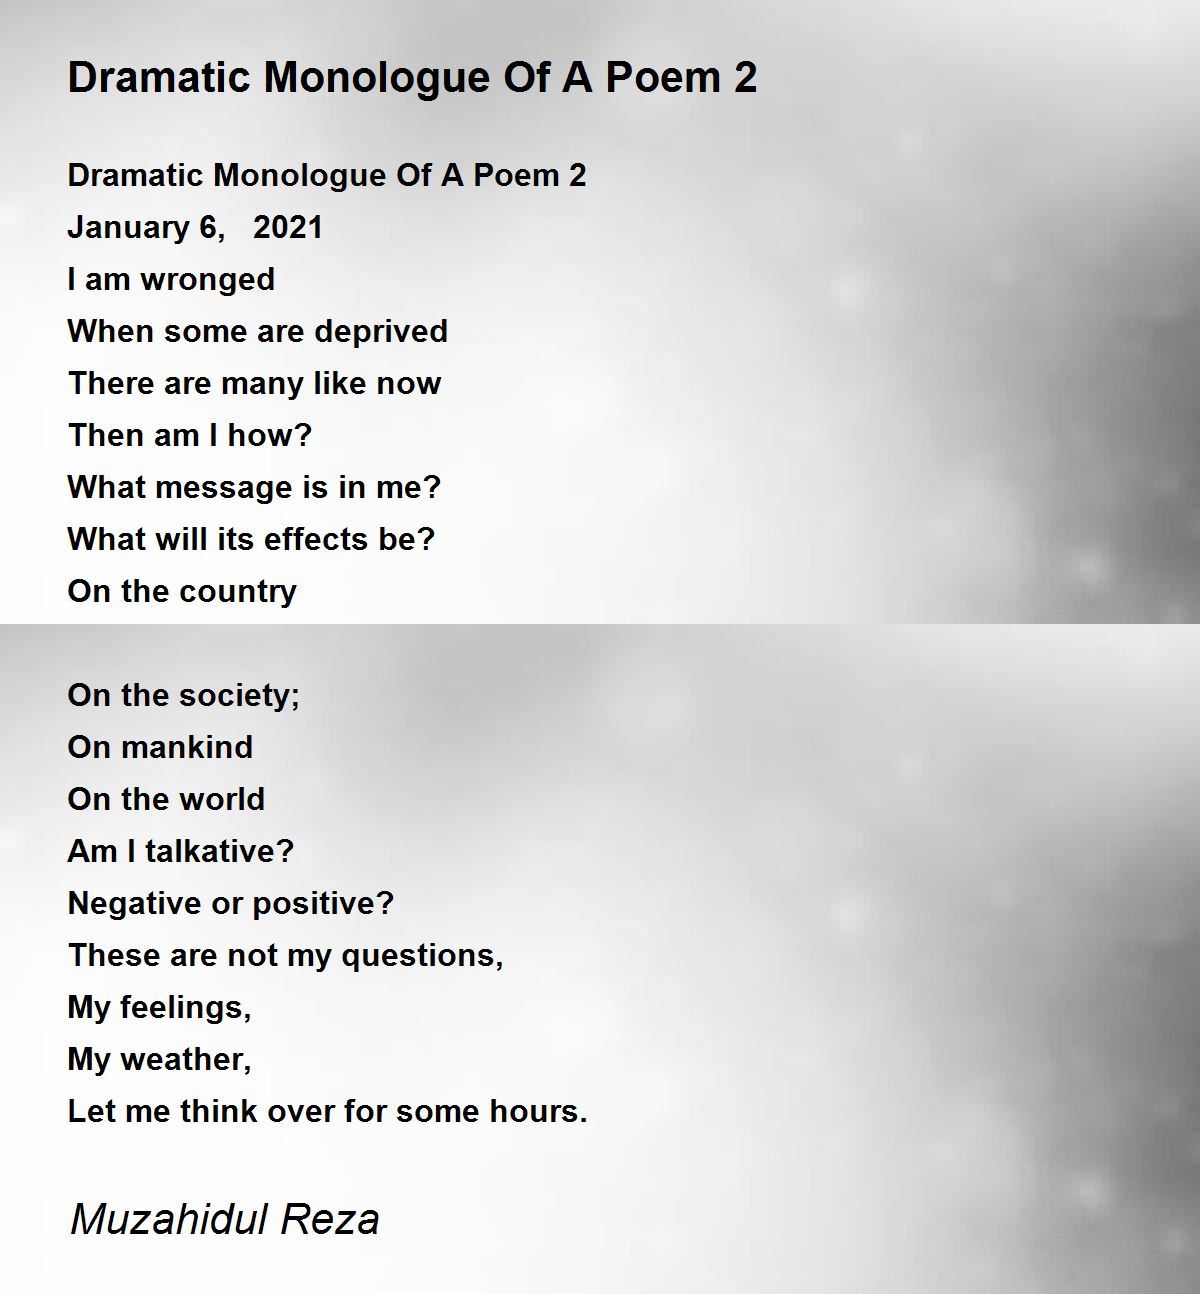 Dramatic Monologue Of A Poem 2 